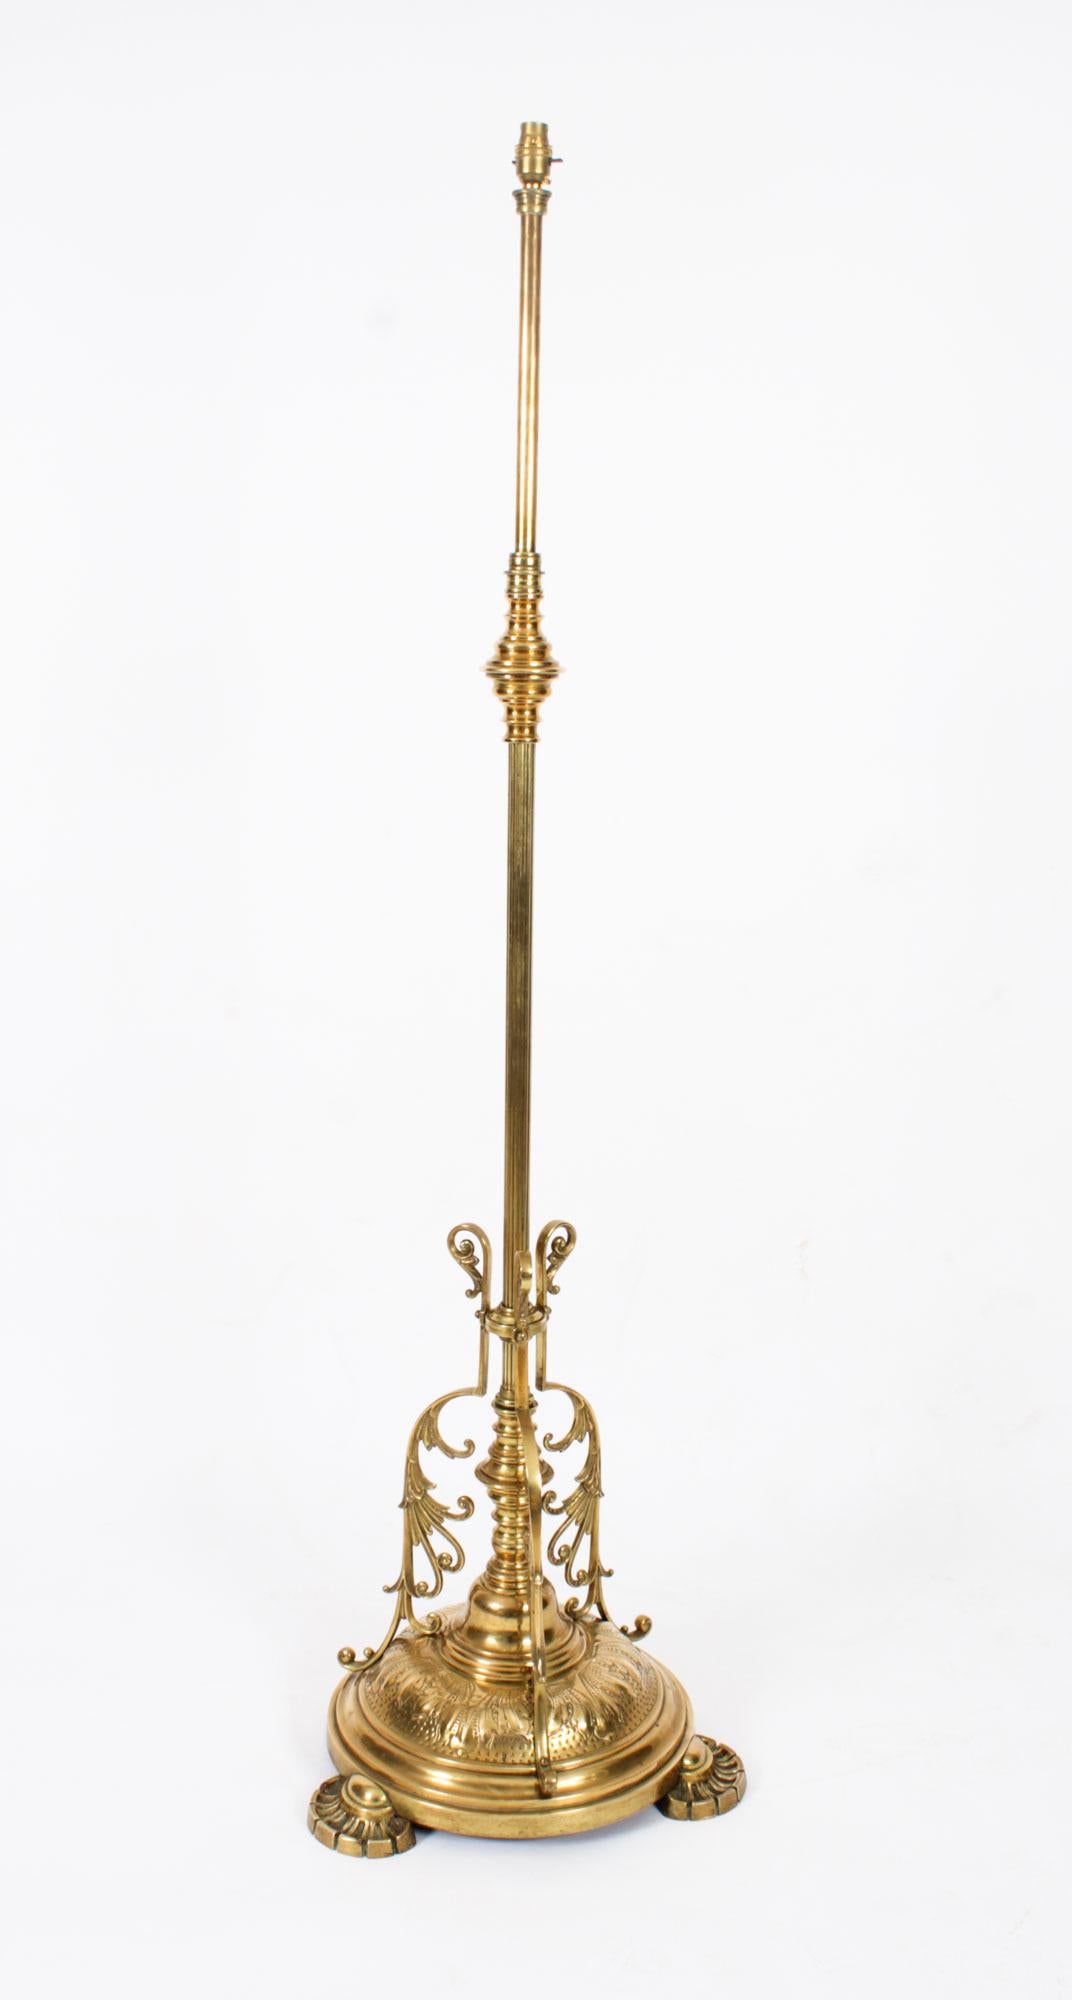 This is a highly attractive and exhibition quality antique late Victorian brass floor standard lamp now converted to electricity, circa 1890 in date.

This splendid lamp features a distinguished cylindrical reeded column  decorated with foliate